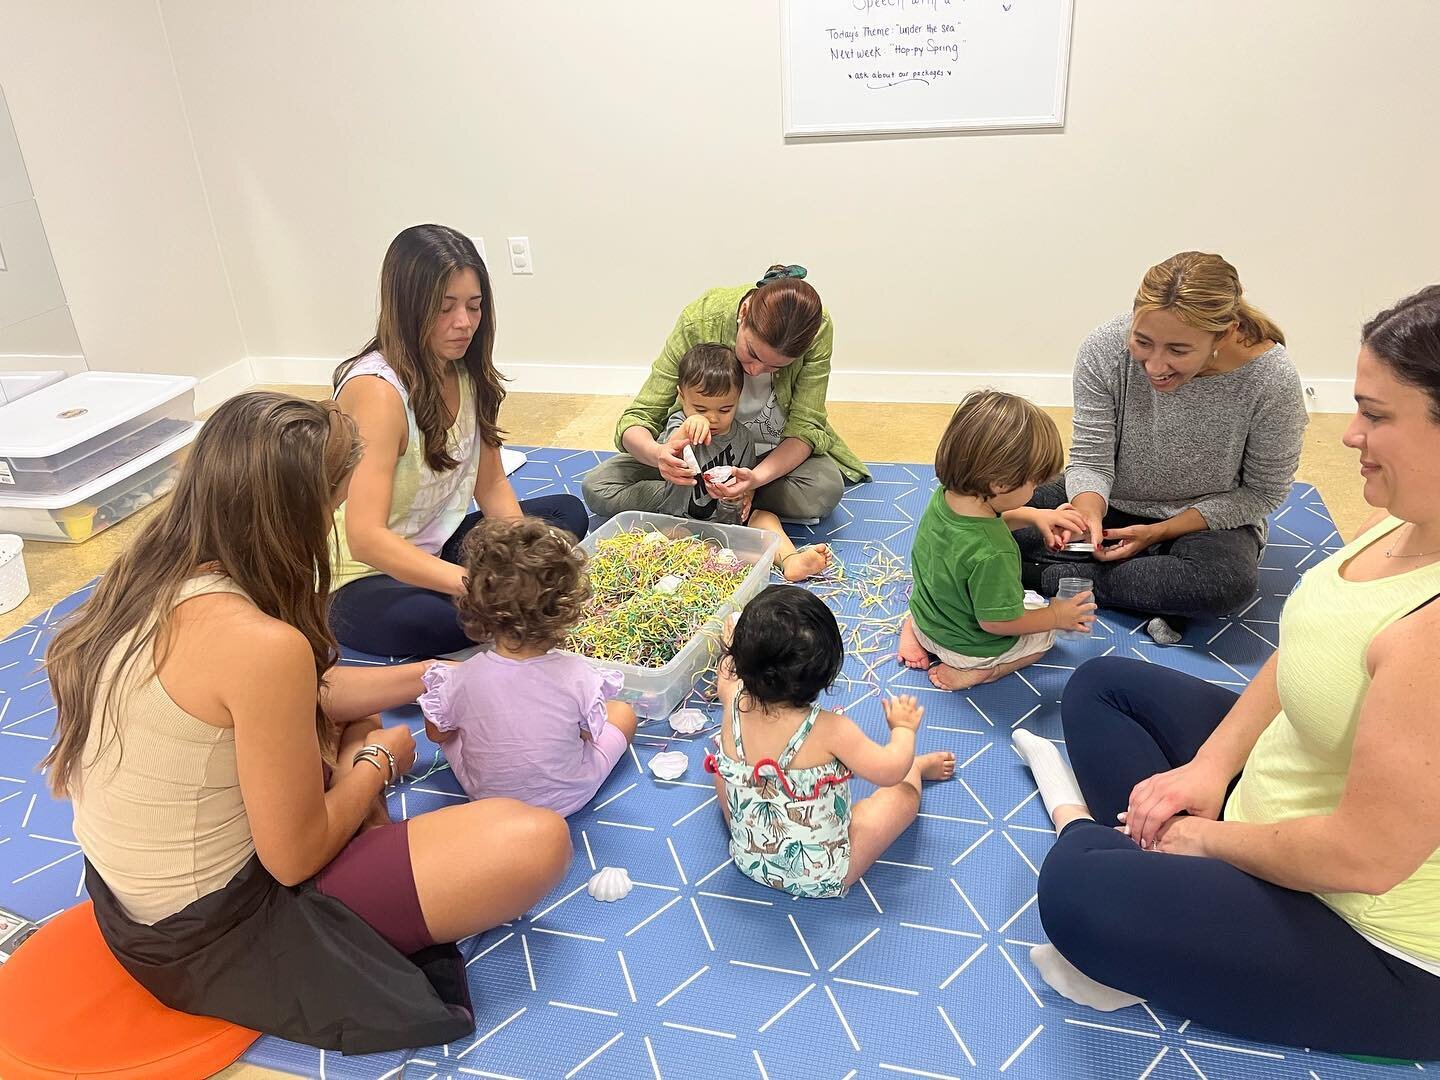 Fridays just got a whole lot better! 😍😃 

Our classes are open for Spring with weekly classes for children ages 6 months - 4 years old! 👏🏼 

✨ Classes are led by certified bilingual Speech Language Pathologists (which means we are trained to lead